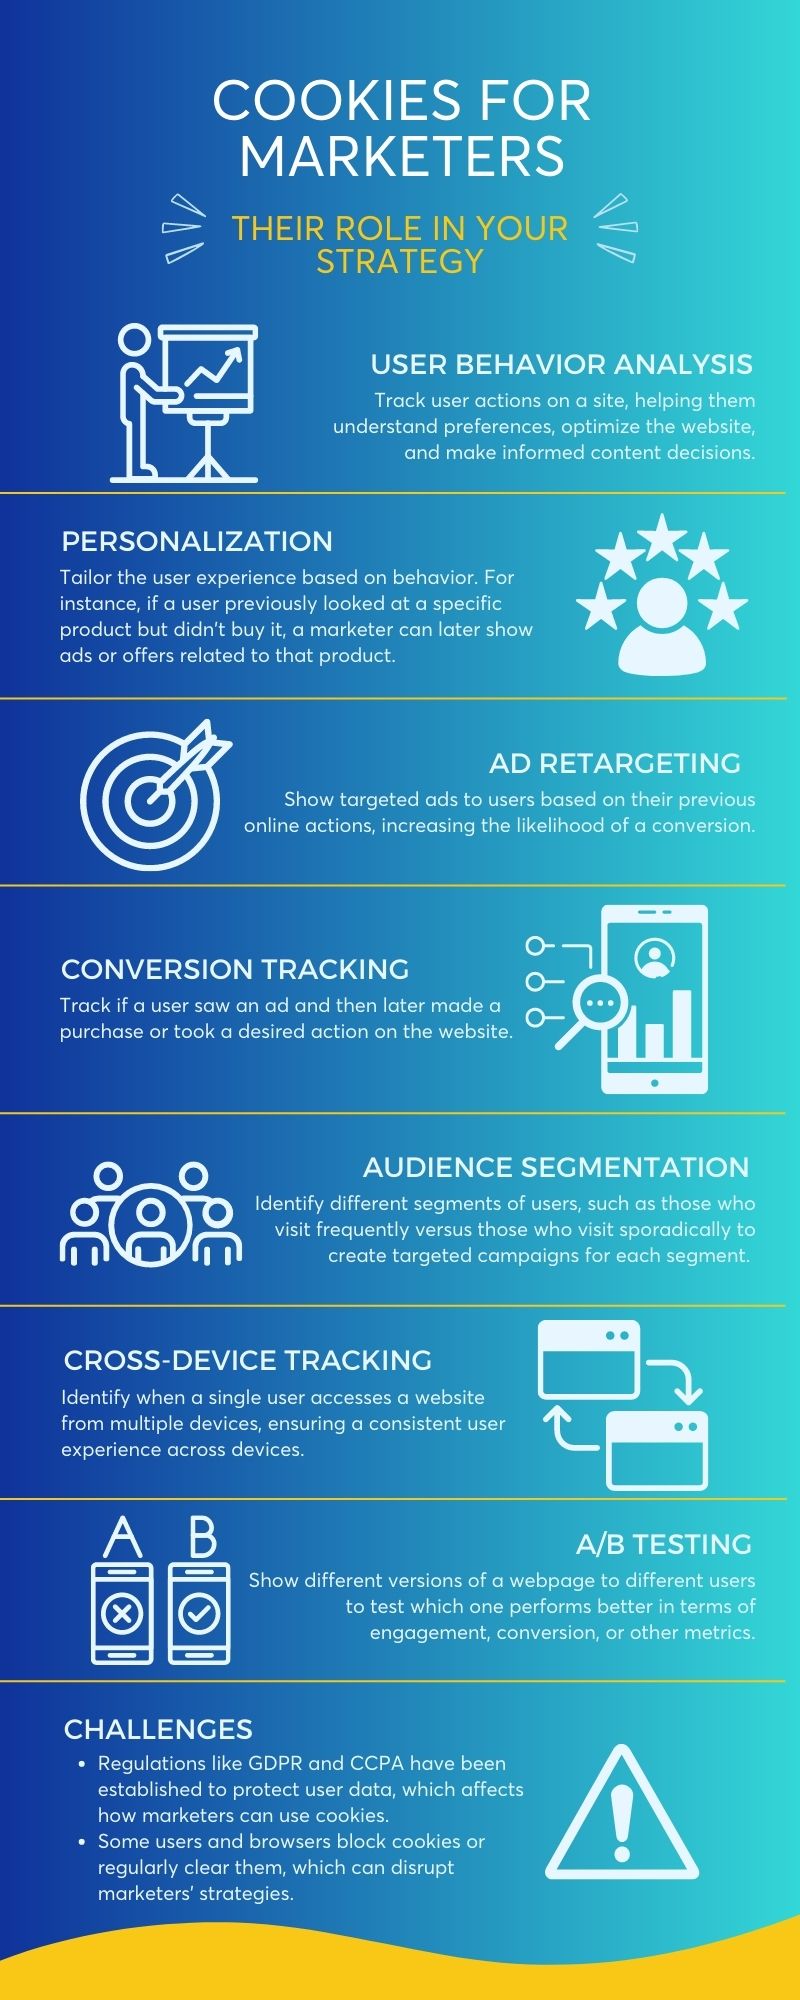 Cookies for marketers infographic.